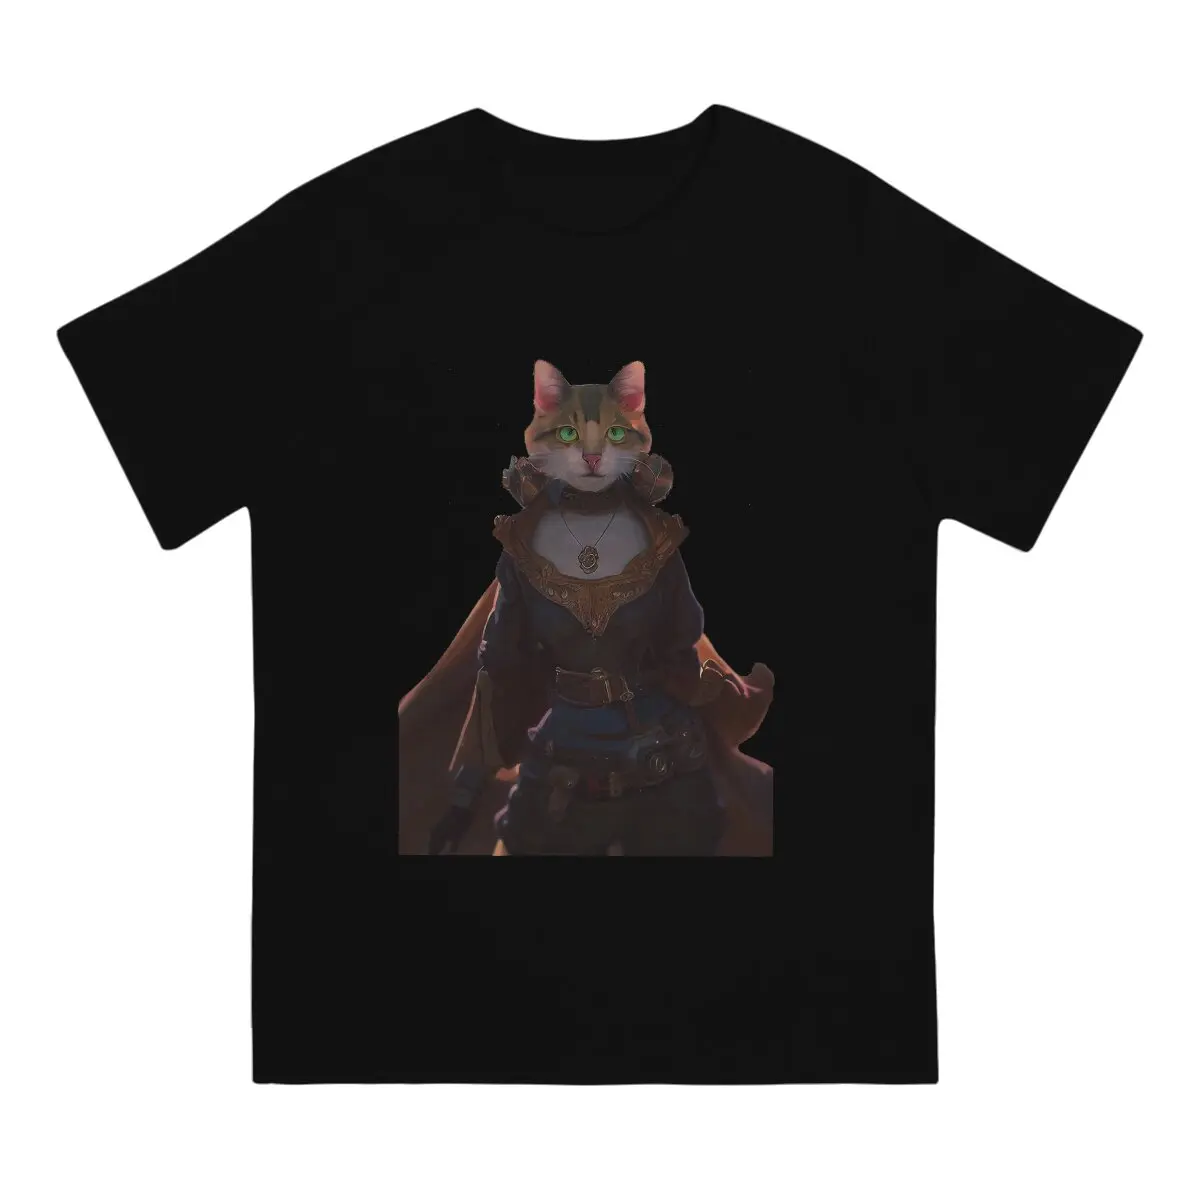 Female Figure Men T Shirt Puss In Boot The Last Wish Vintage Tee Shirt Short Sleeve 1 - Puss In Boots Plush